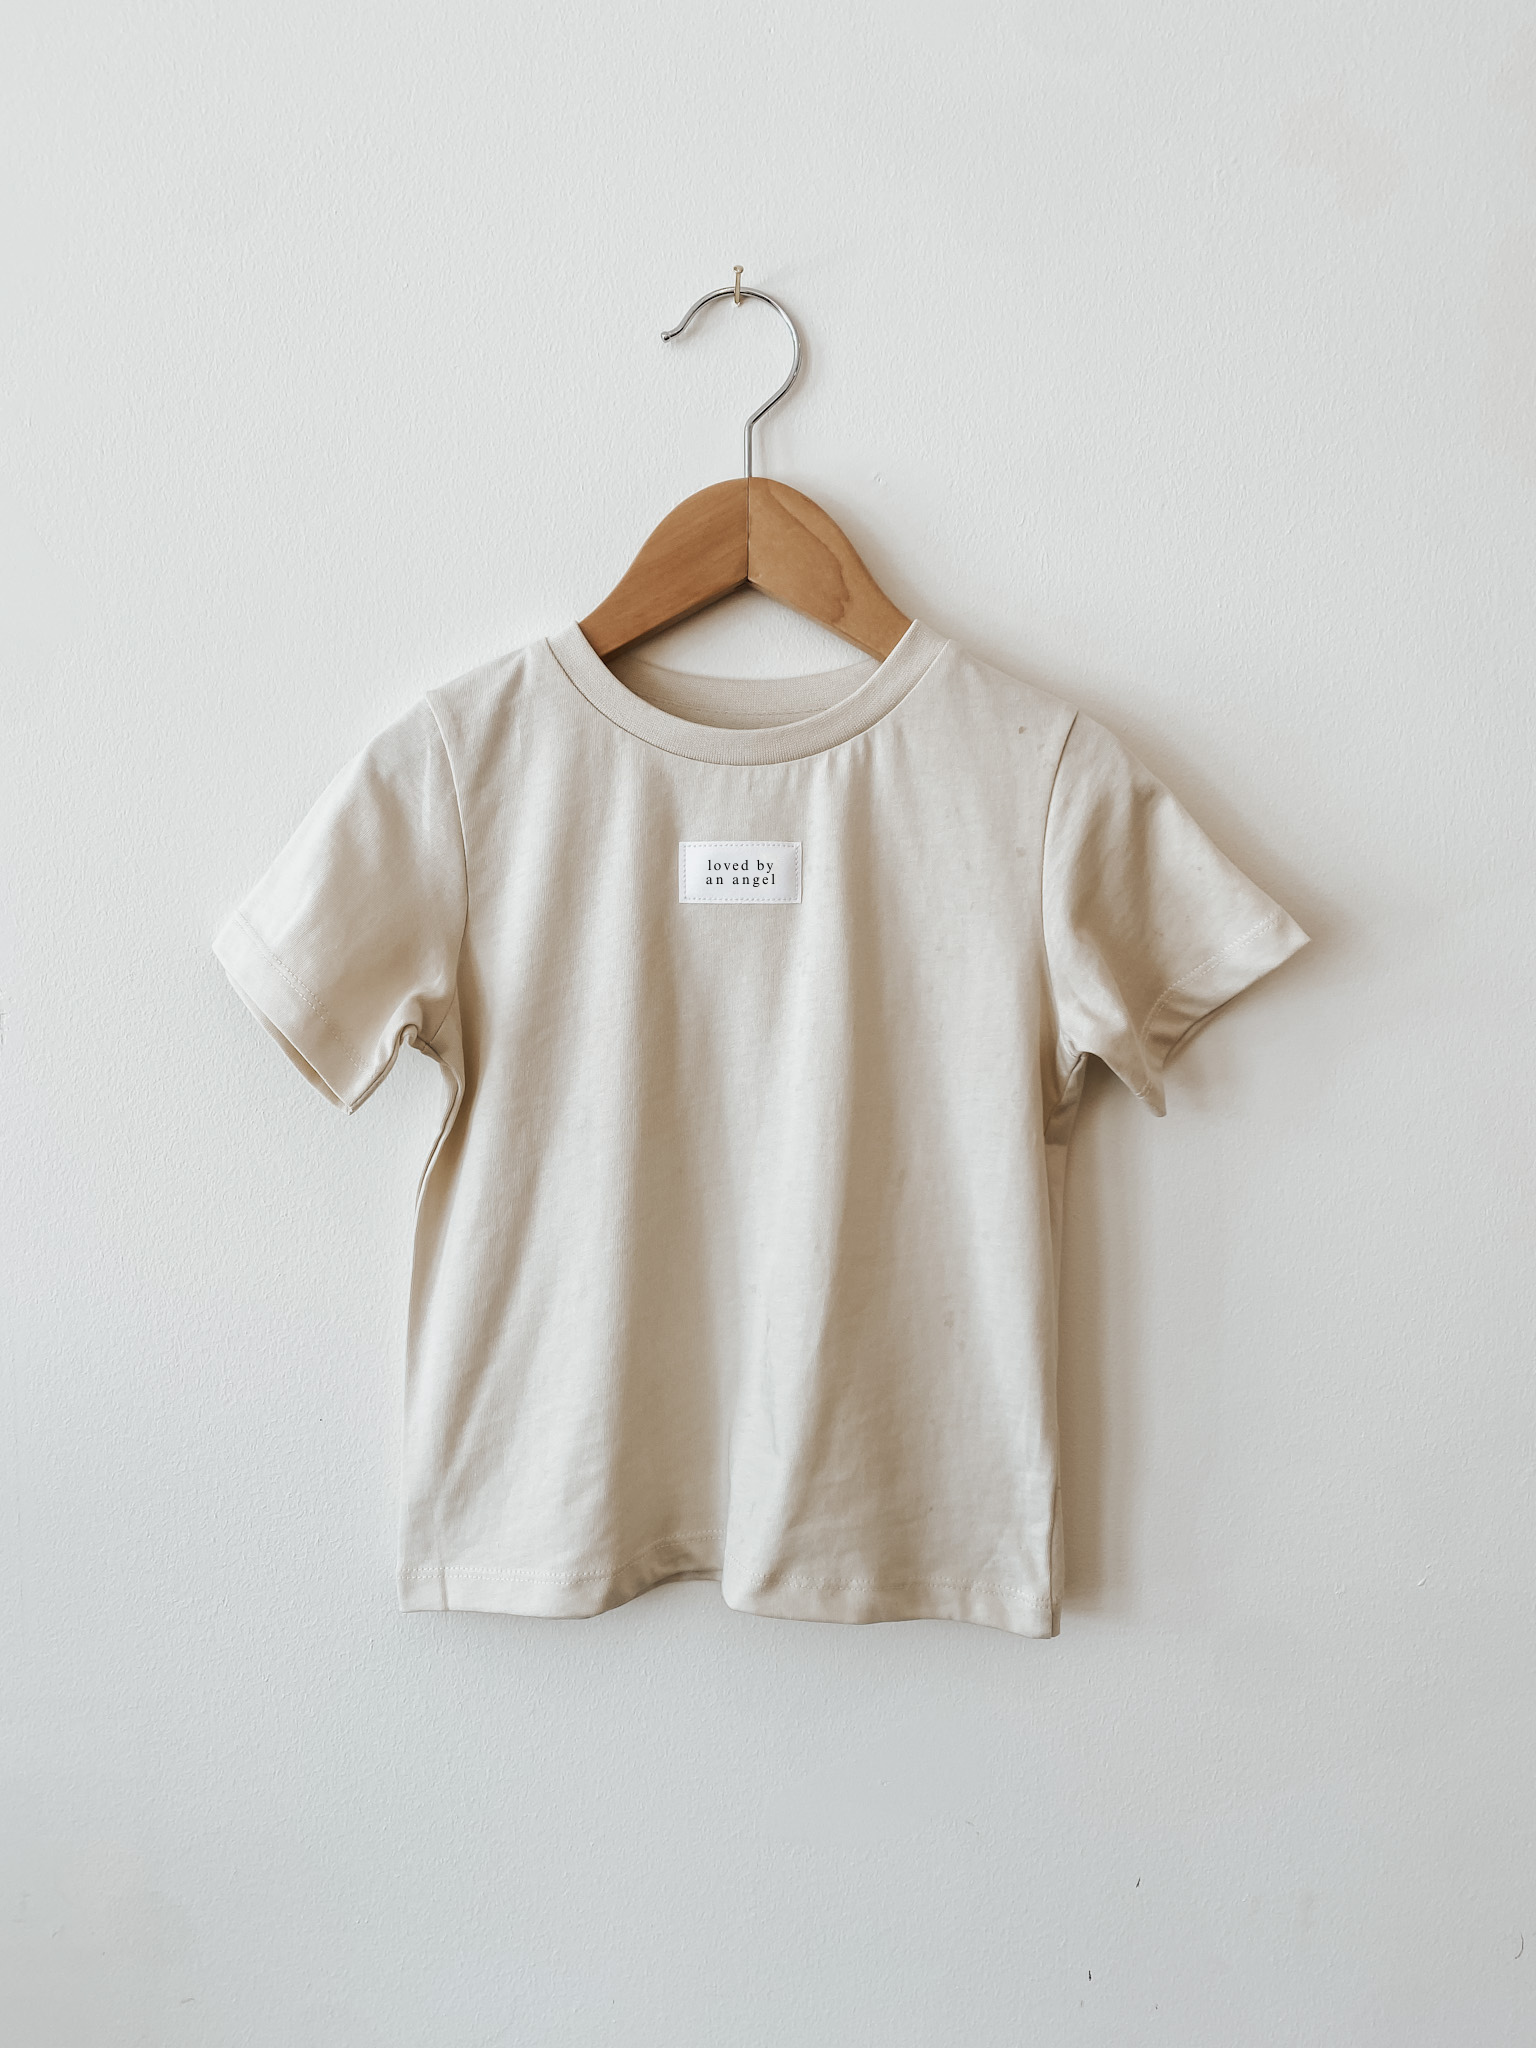 Classic Short Sleeve Tee | Loved By An Angel